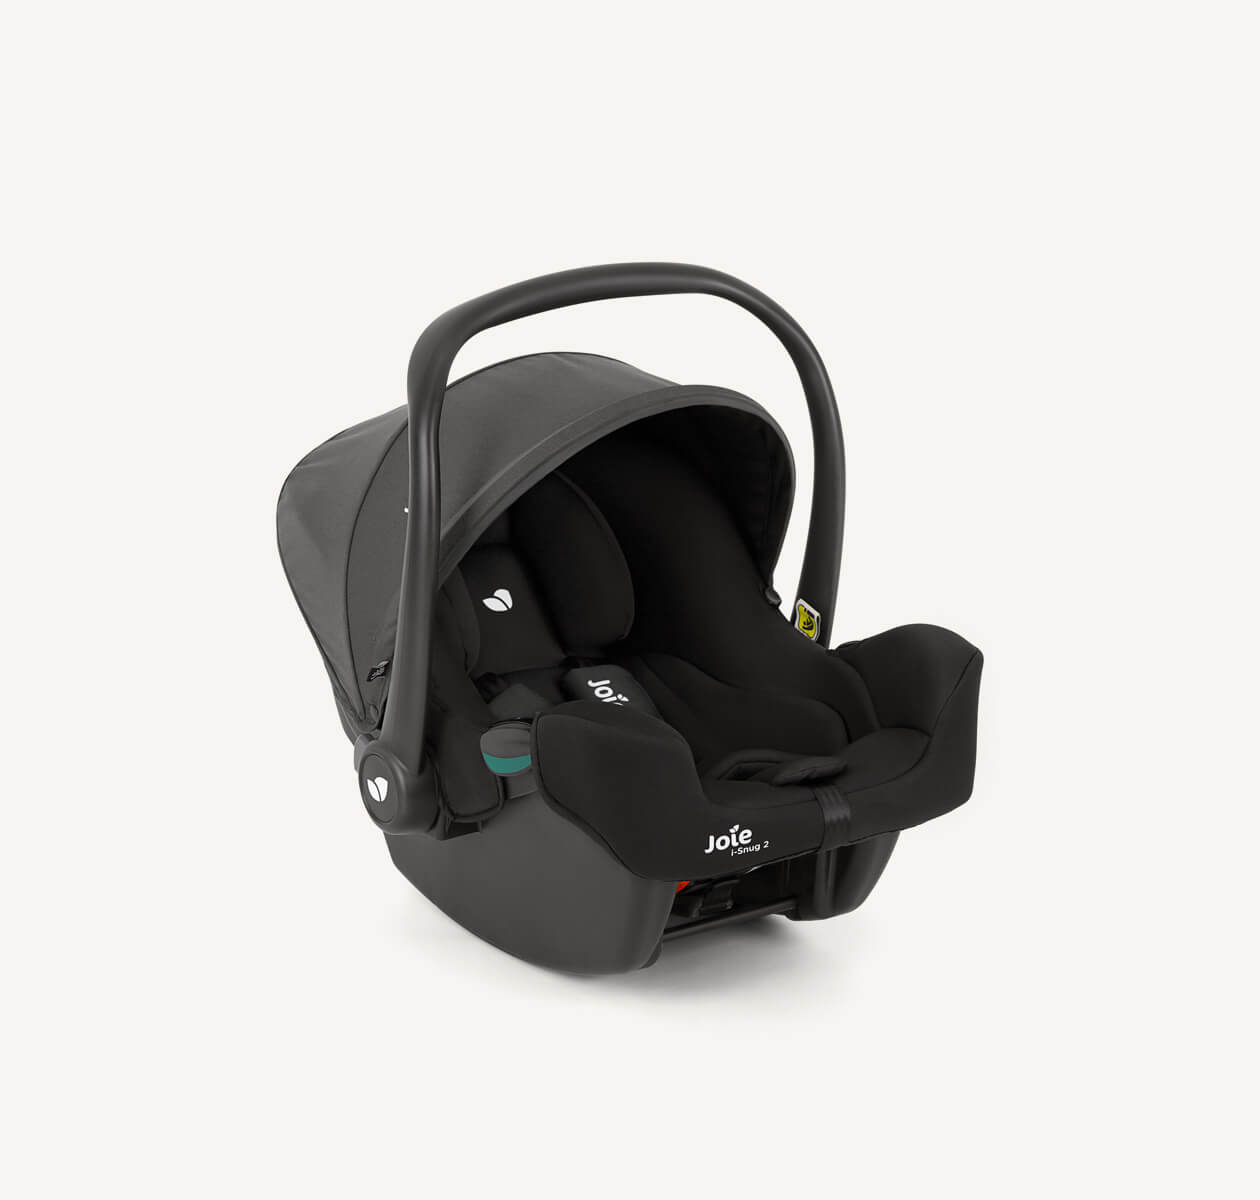 Joie Versatrax 3in1 Travel System-Shale including I-Snug Car Seat & Isofix base